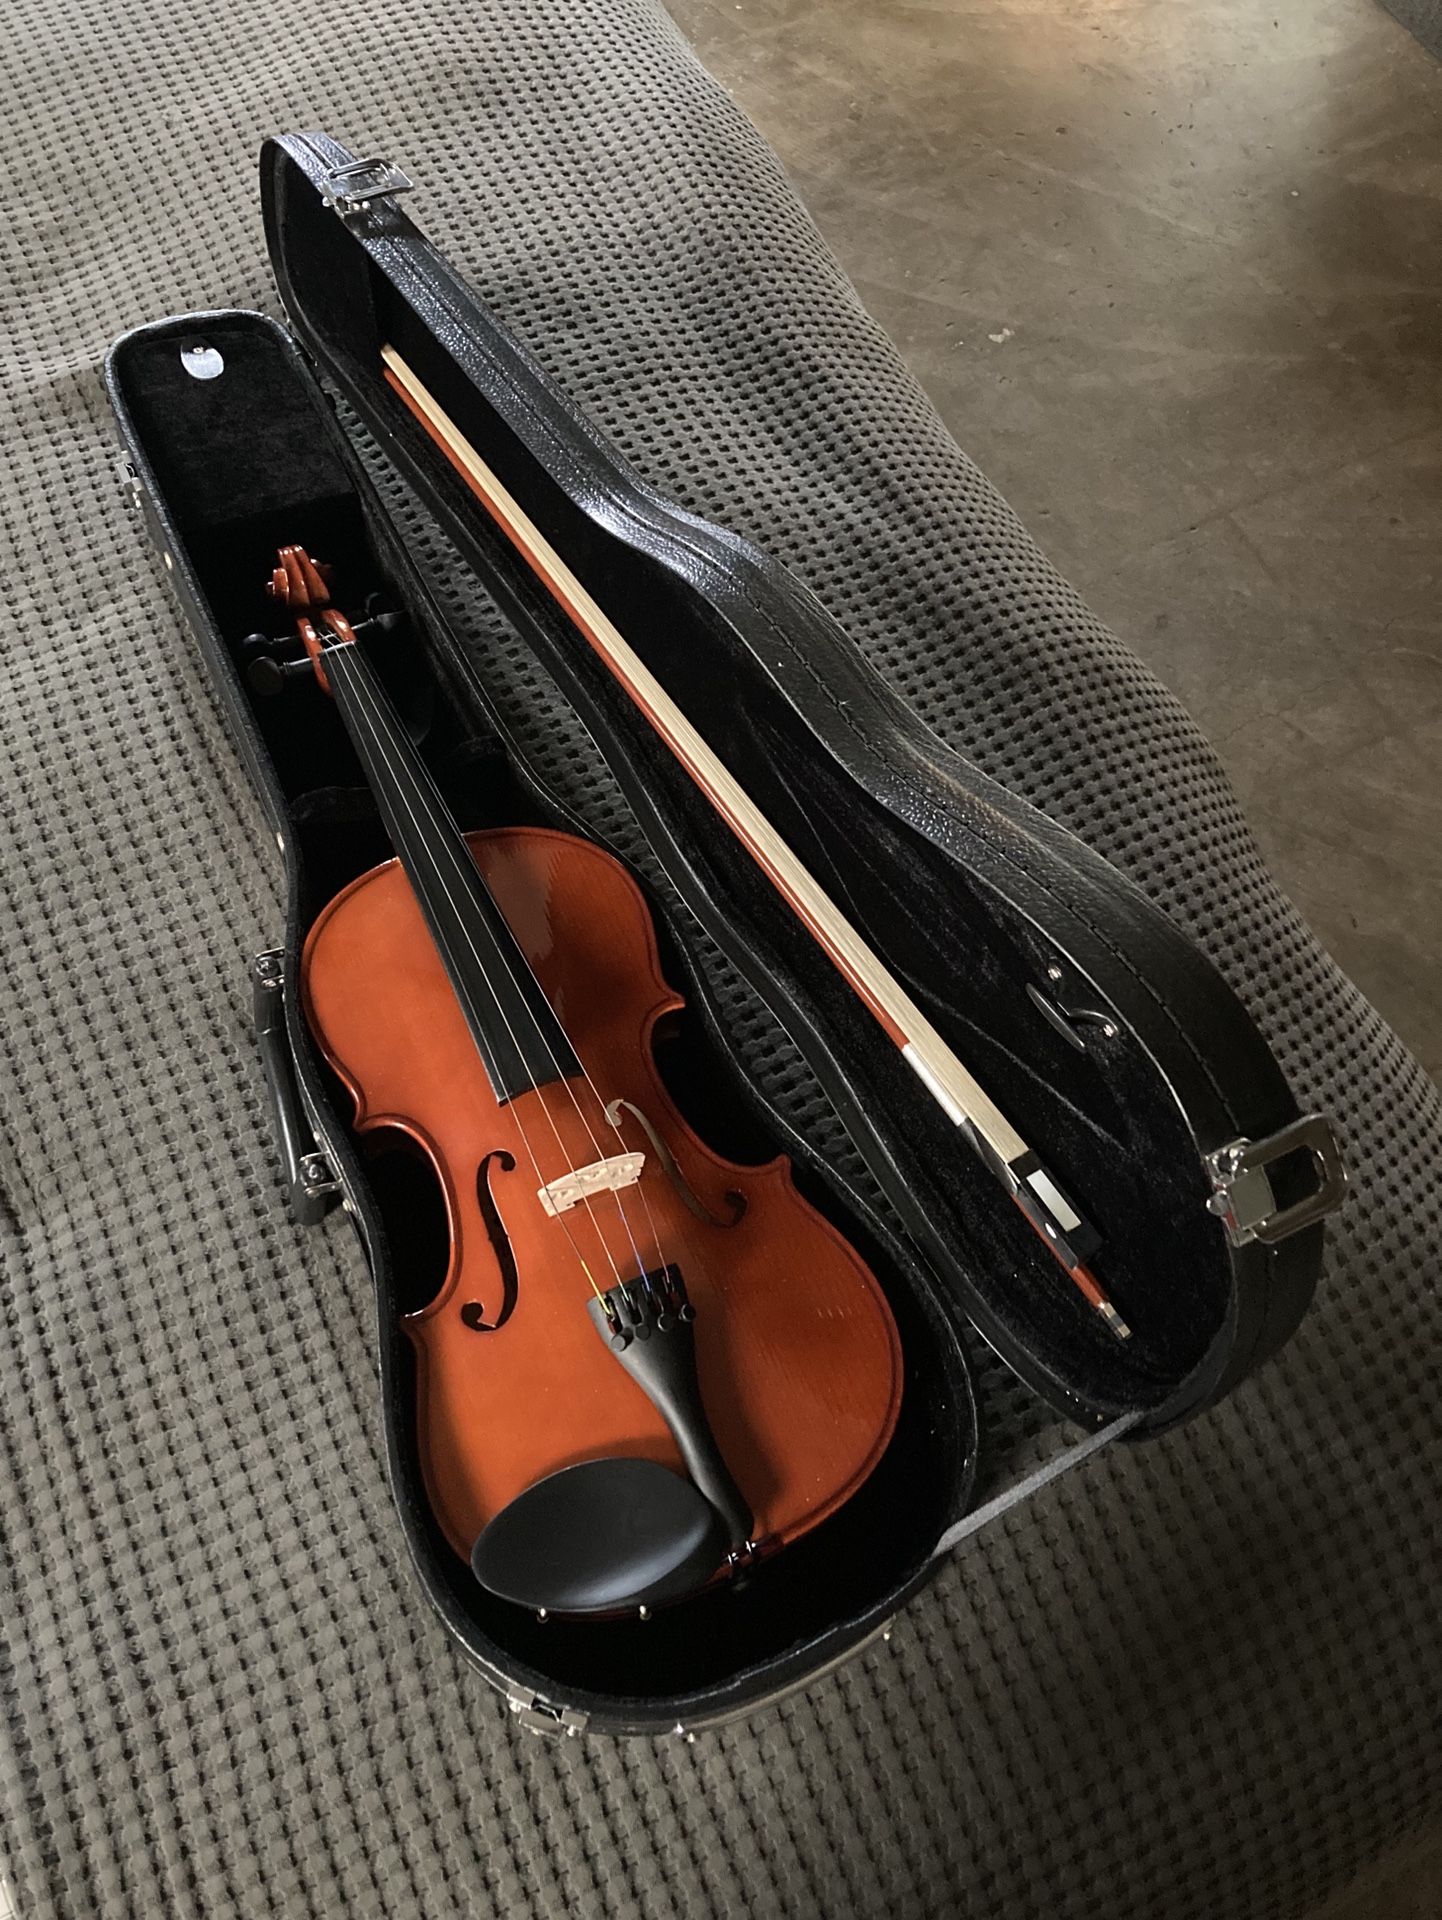 NEW NEVER USED!!! Violin 🎻 Look 👀 Pictures for details $65.00